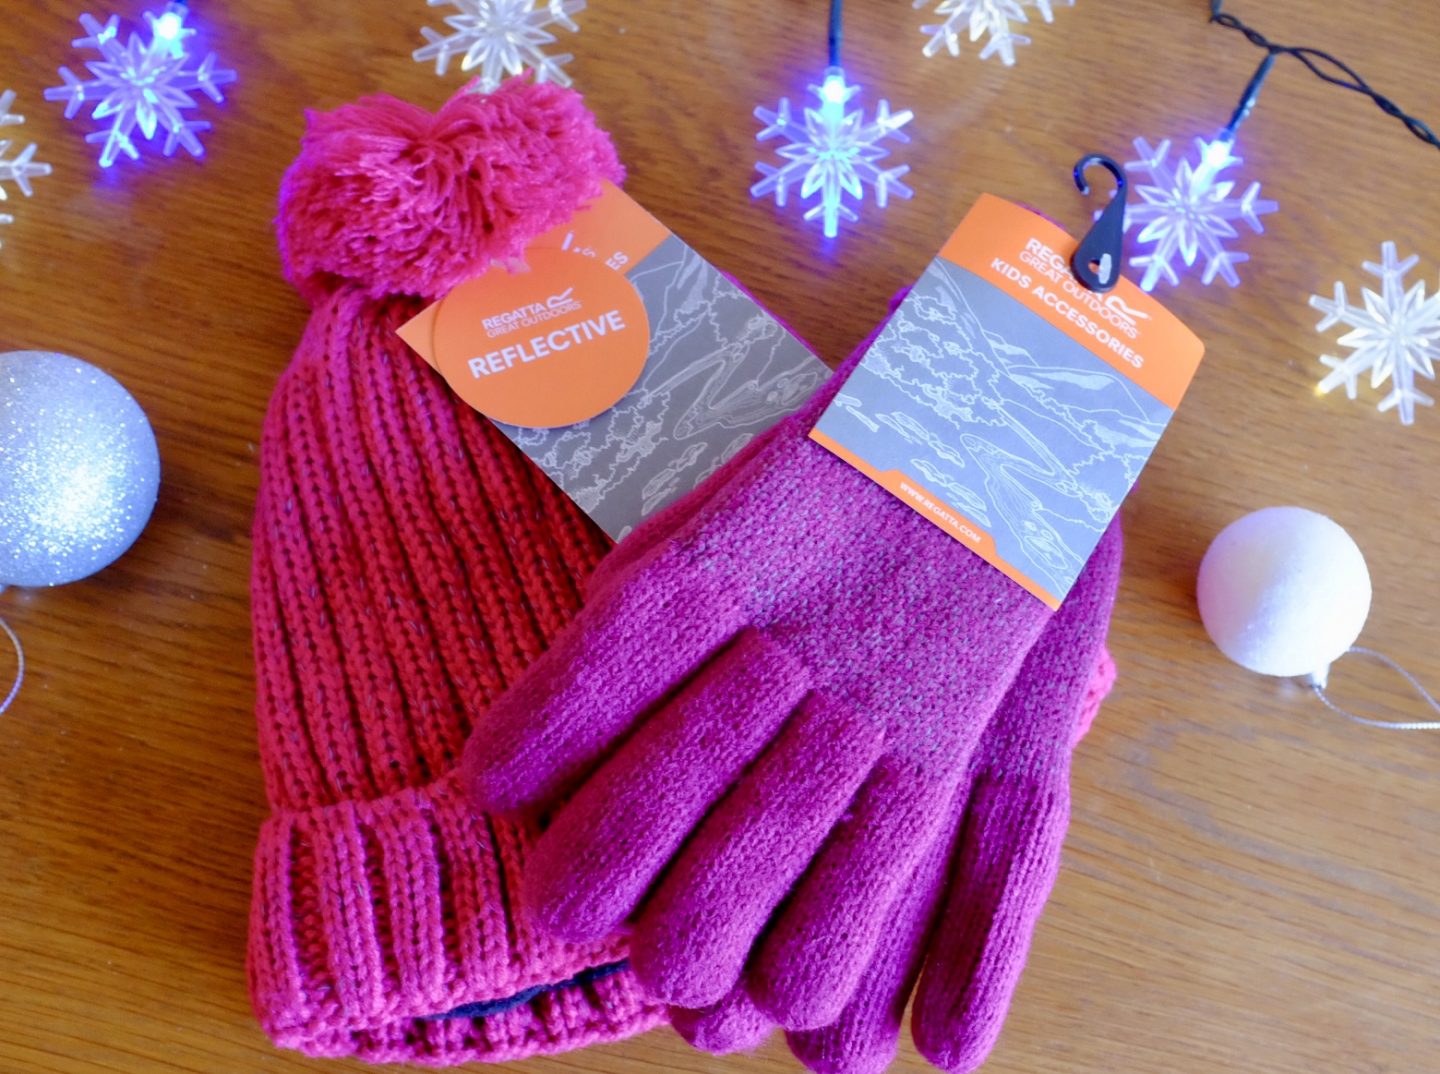 hat and gloves set from regatta outdoors